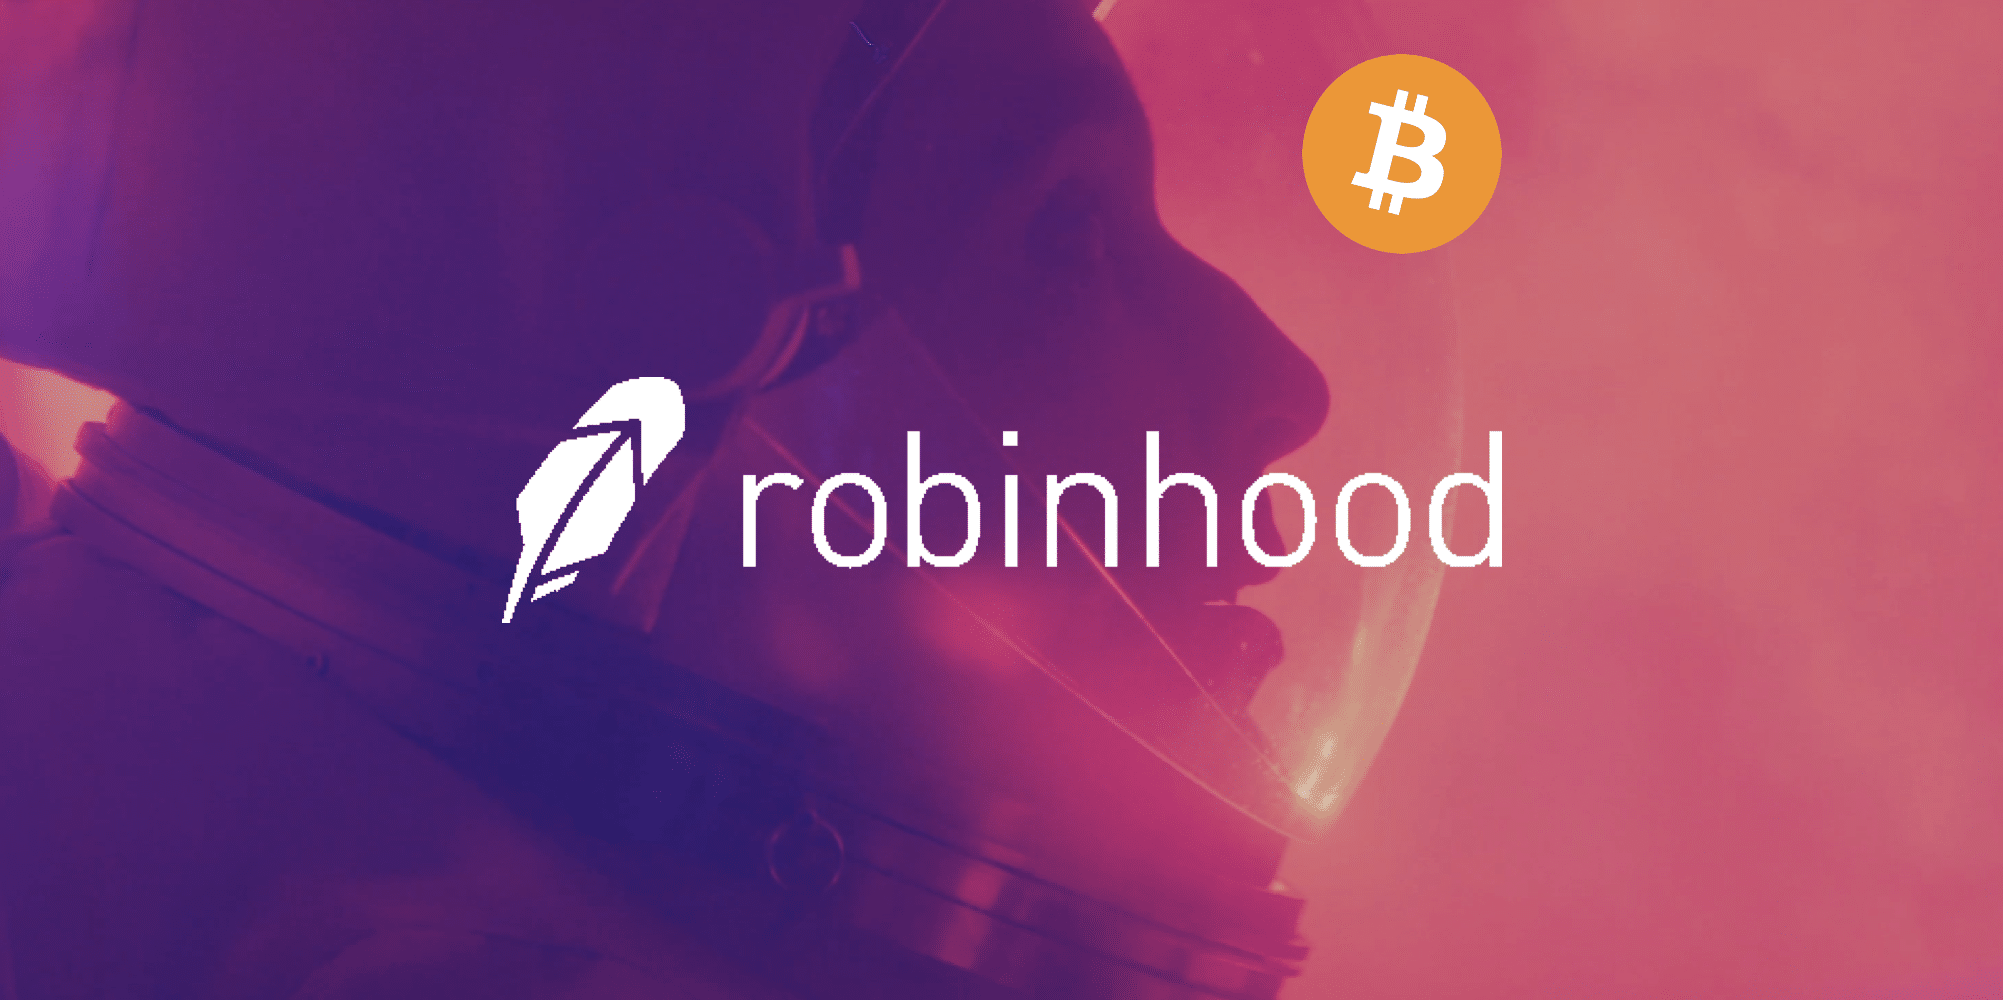 Commission-Free Investing Robinhood Coupon Codes Online July 2020